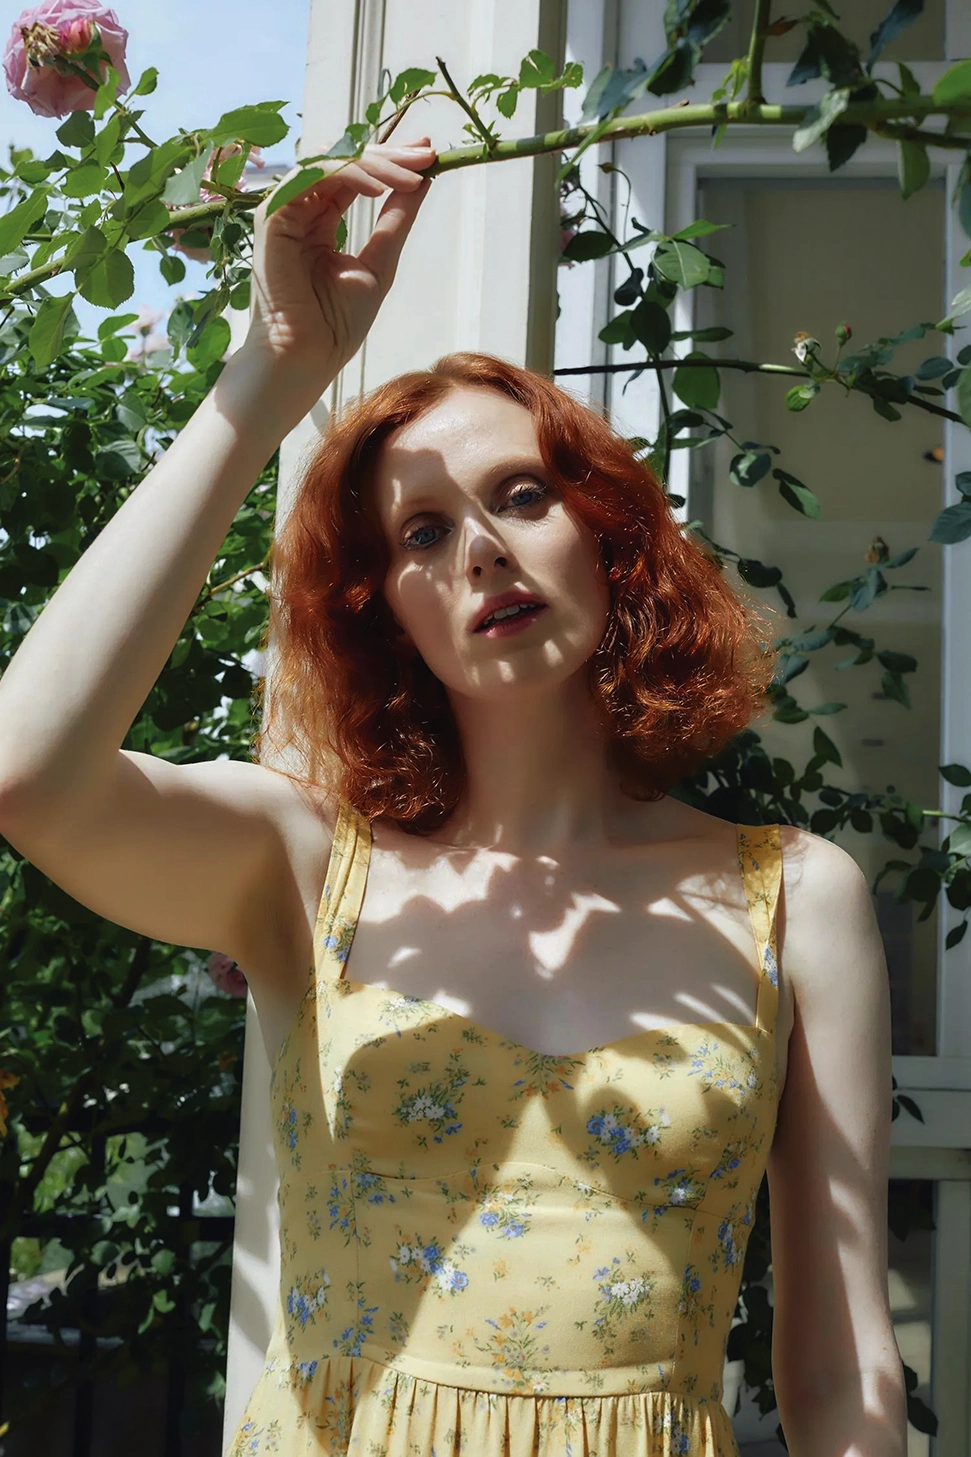 Karen Elson Opens Up On Fame, Fashion And Finding Her True Voice